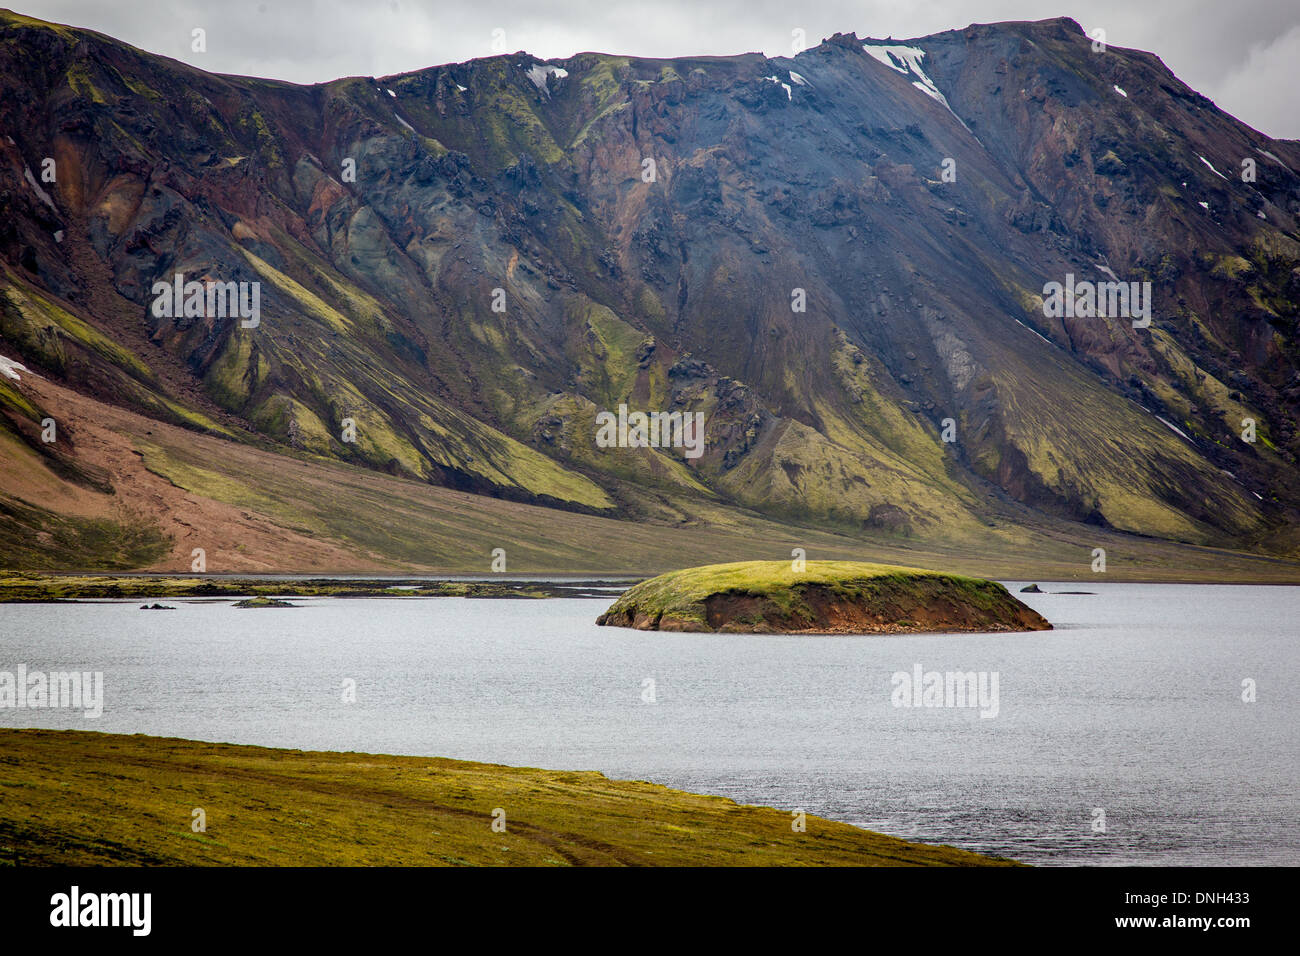 LAKE AND MOUNTAIN OF LAVA AND RHYOLITE, LANDMANNALAUGAR, VOLCANIC AND GEOTHERMAL ZONE OF WHICH THE NAME LITERALLY MEANS 'HOT BATHS OF THE PEOPLE OF THE LAND', REGION OF THE HIGH PLATEAUS, SOUTHERN ICELAND, EUROPE Stock Photo